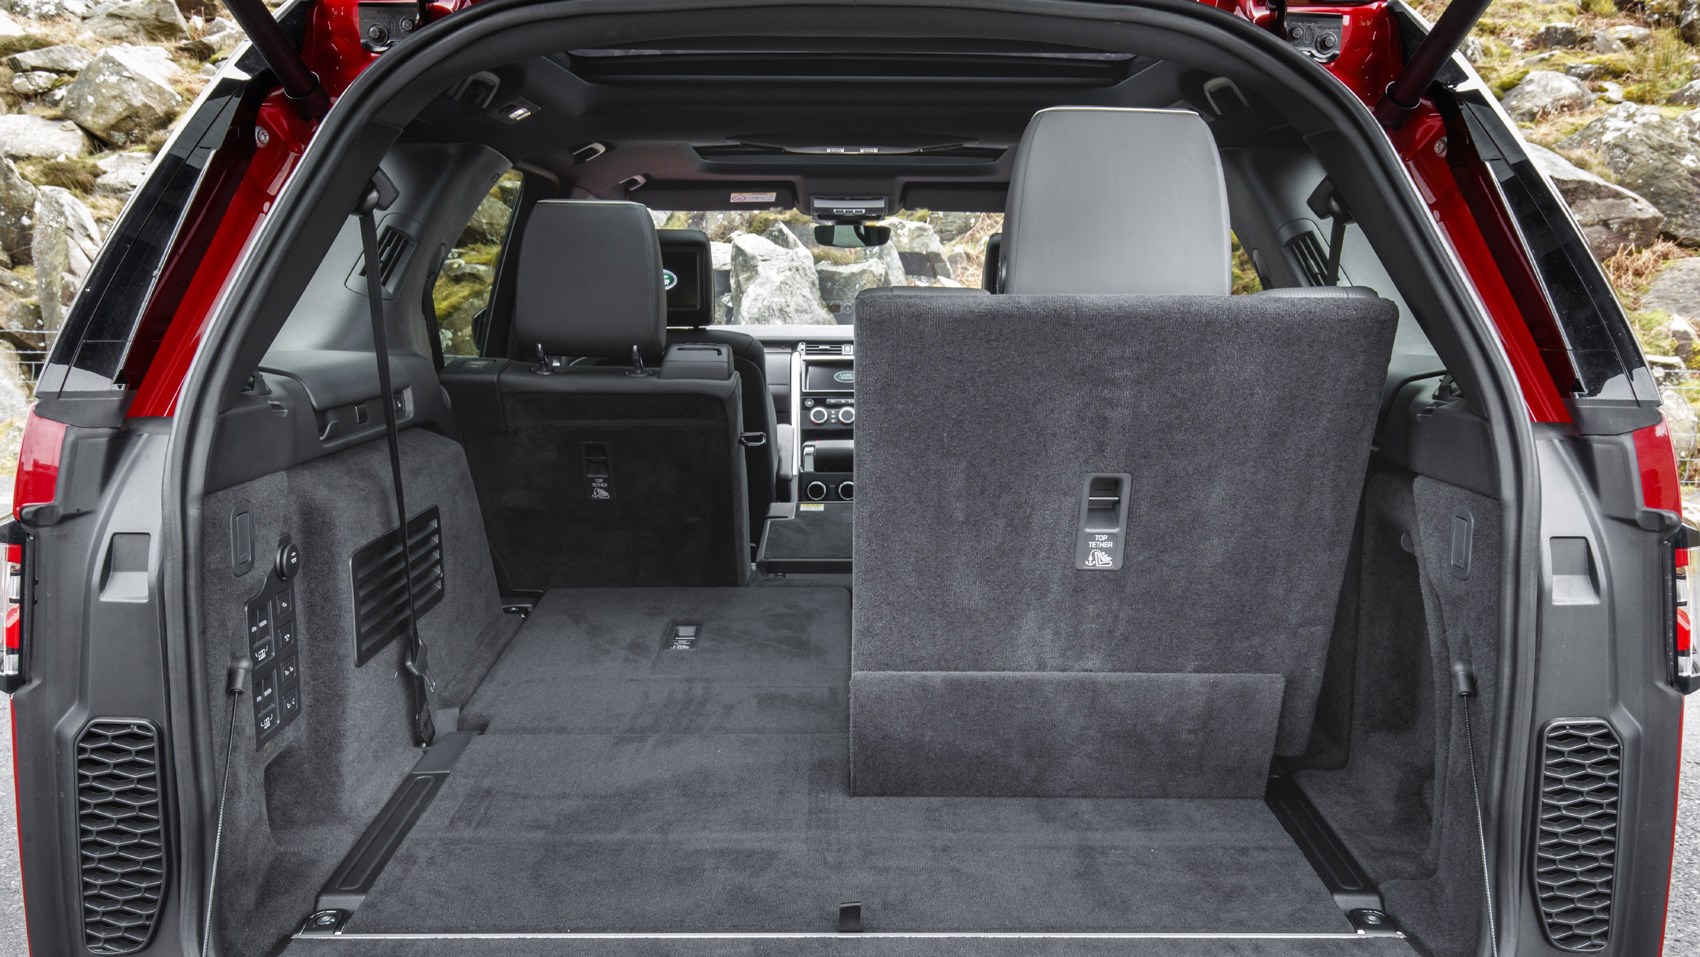 Land Rover Discovery sD4 boot seats down